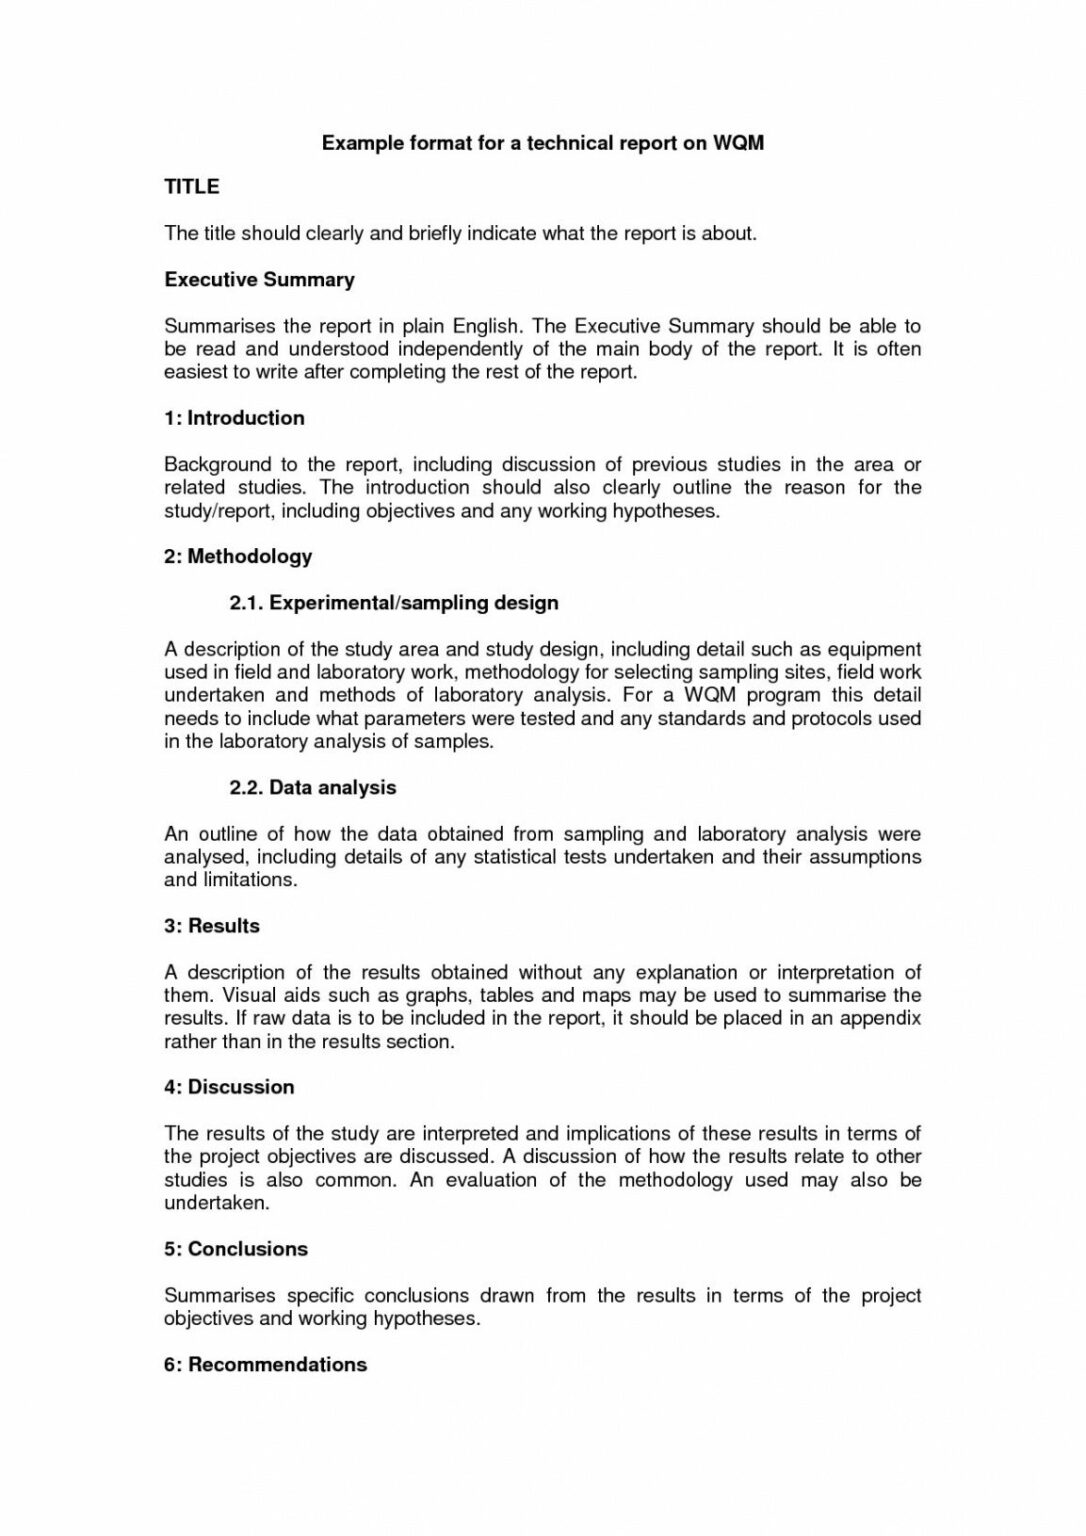 printable-10-technical-report-writing-examples-pdf-examples-engineering